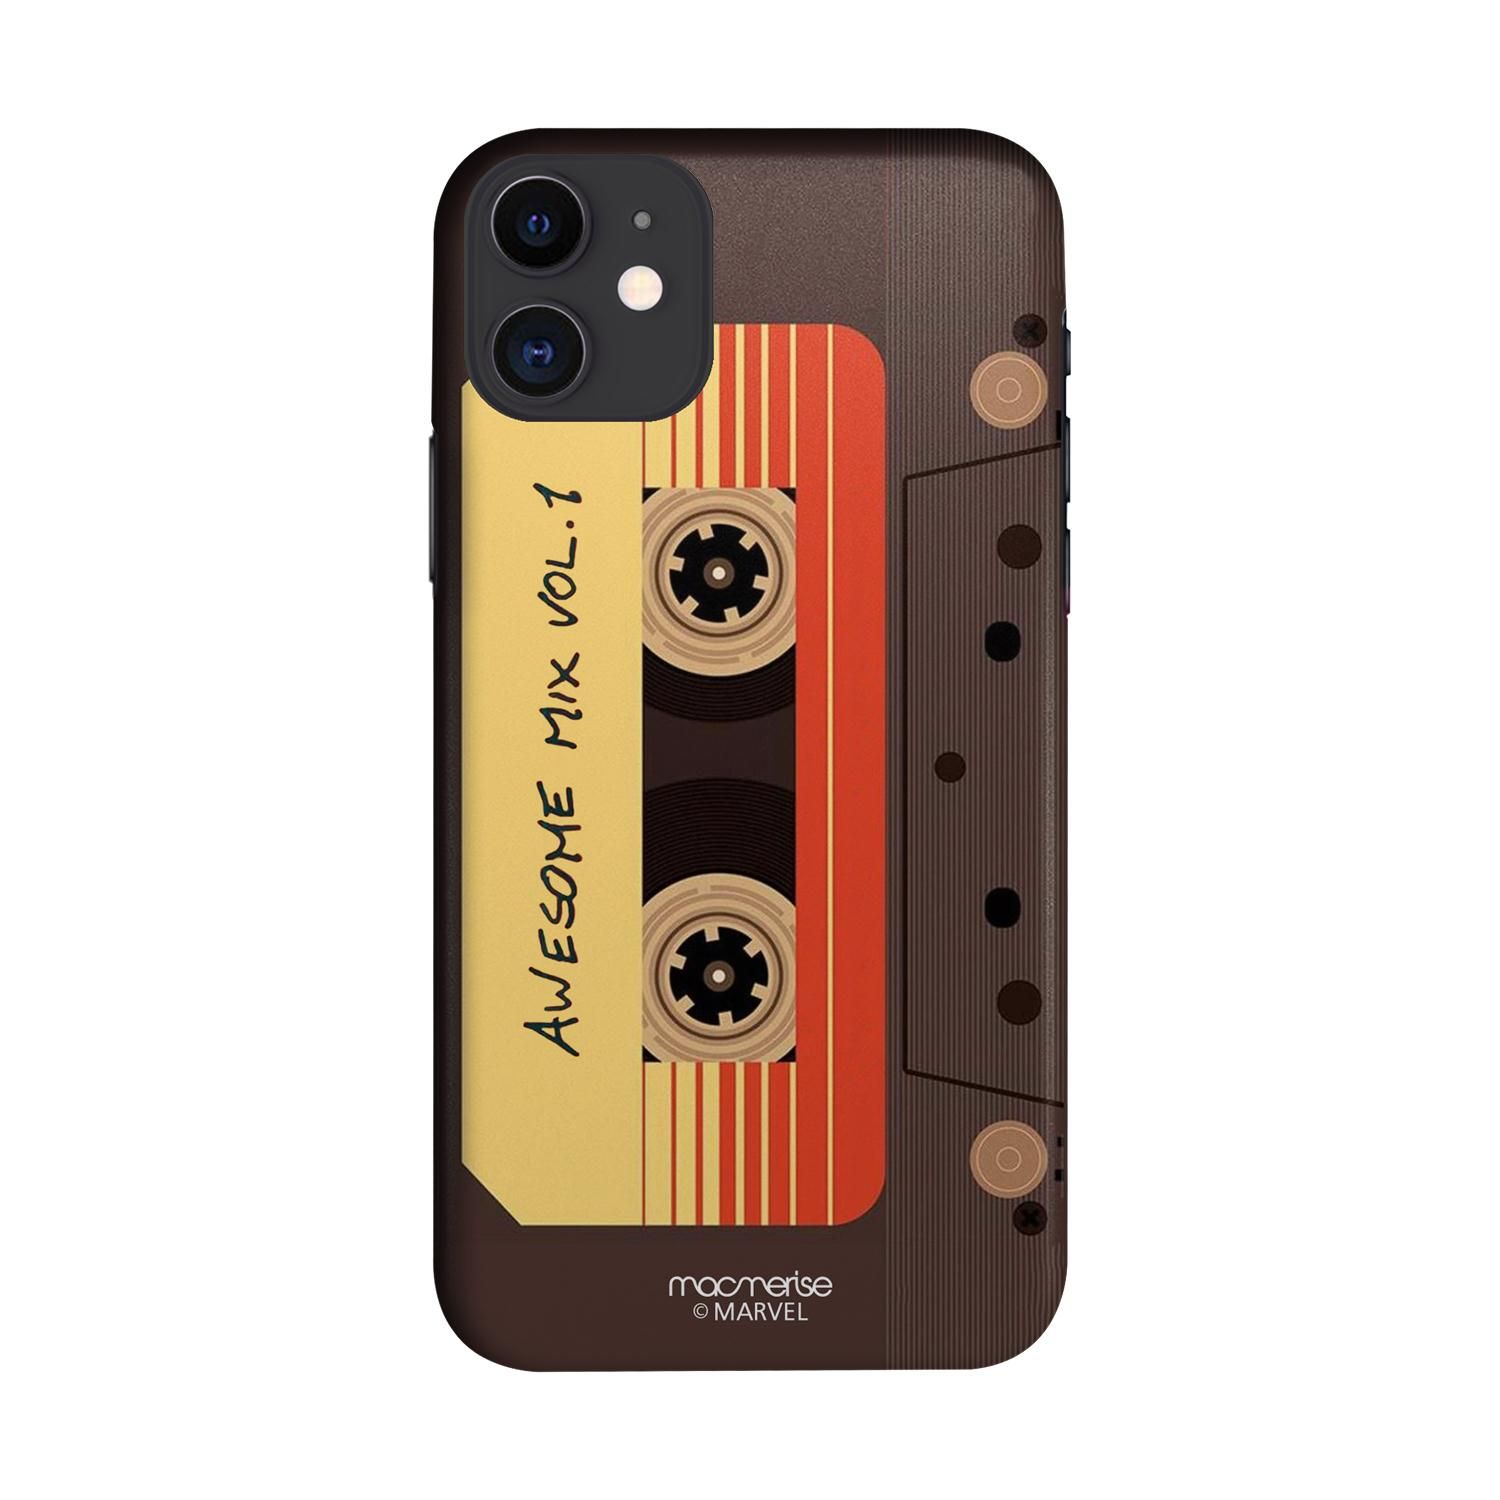 Buy Awesome Mix Tape - Sleek Phone Case for iPhone 11 Online